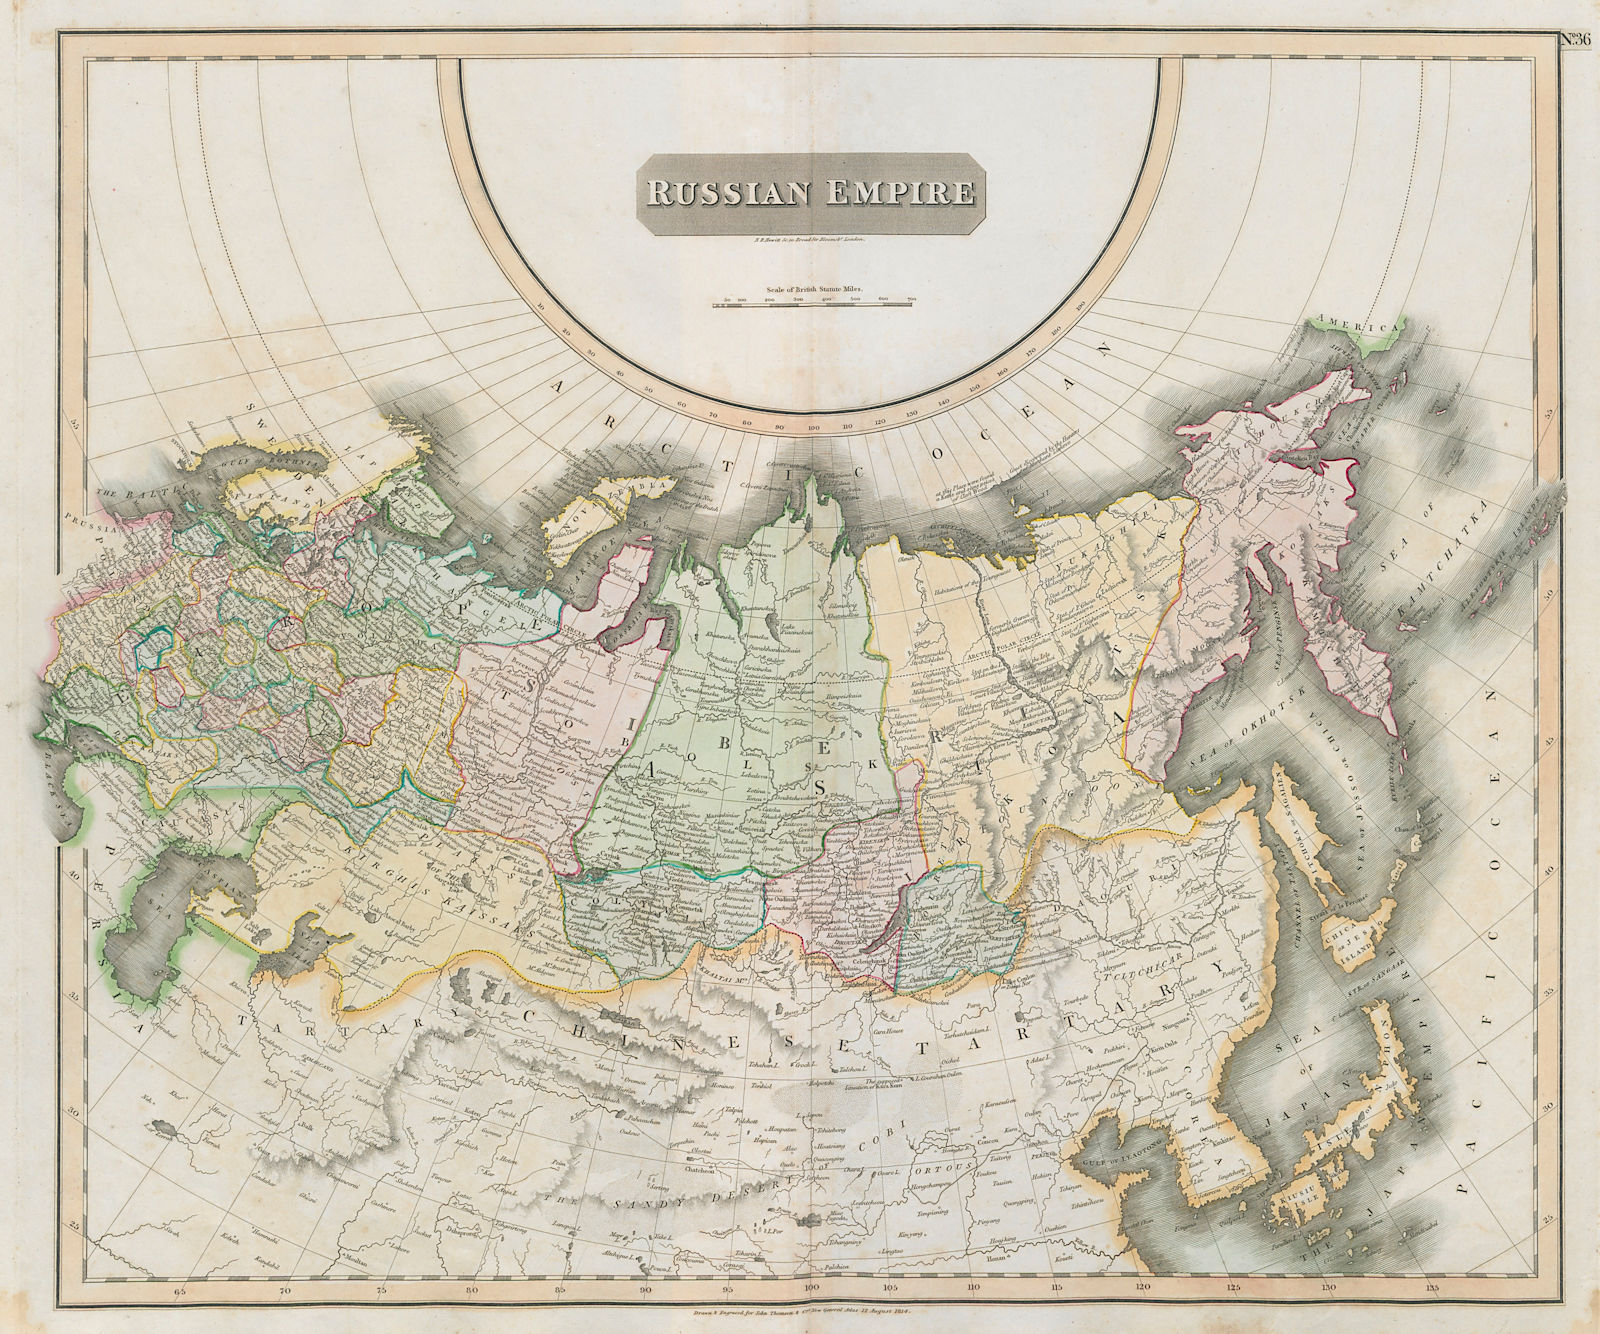 Associate Product "Russian Empire" in provinces in Asia & Europe. Siberia. THOMSON 1817 old map